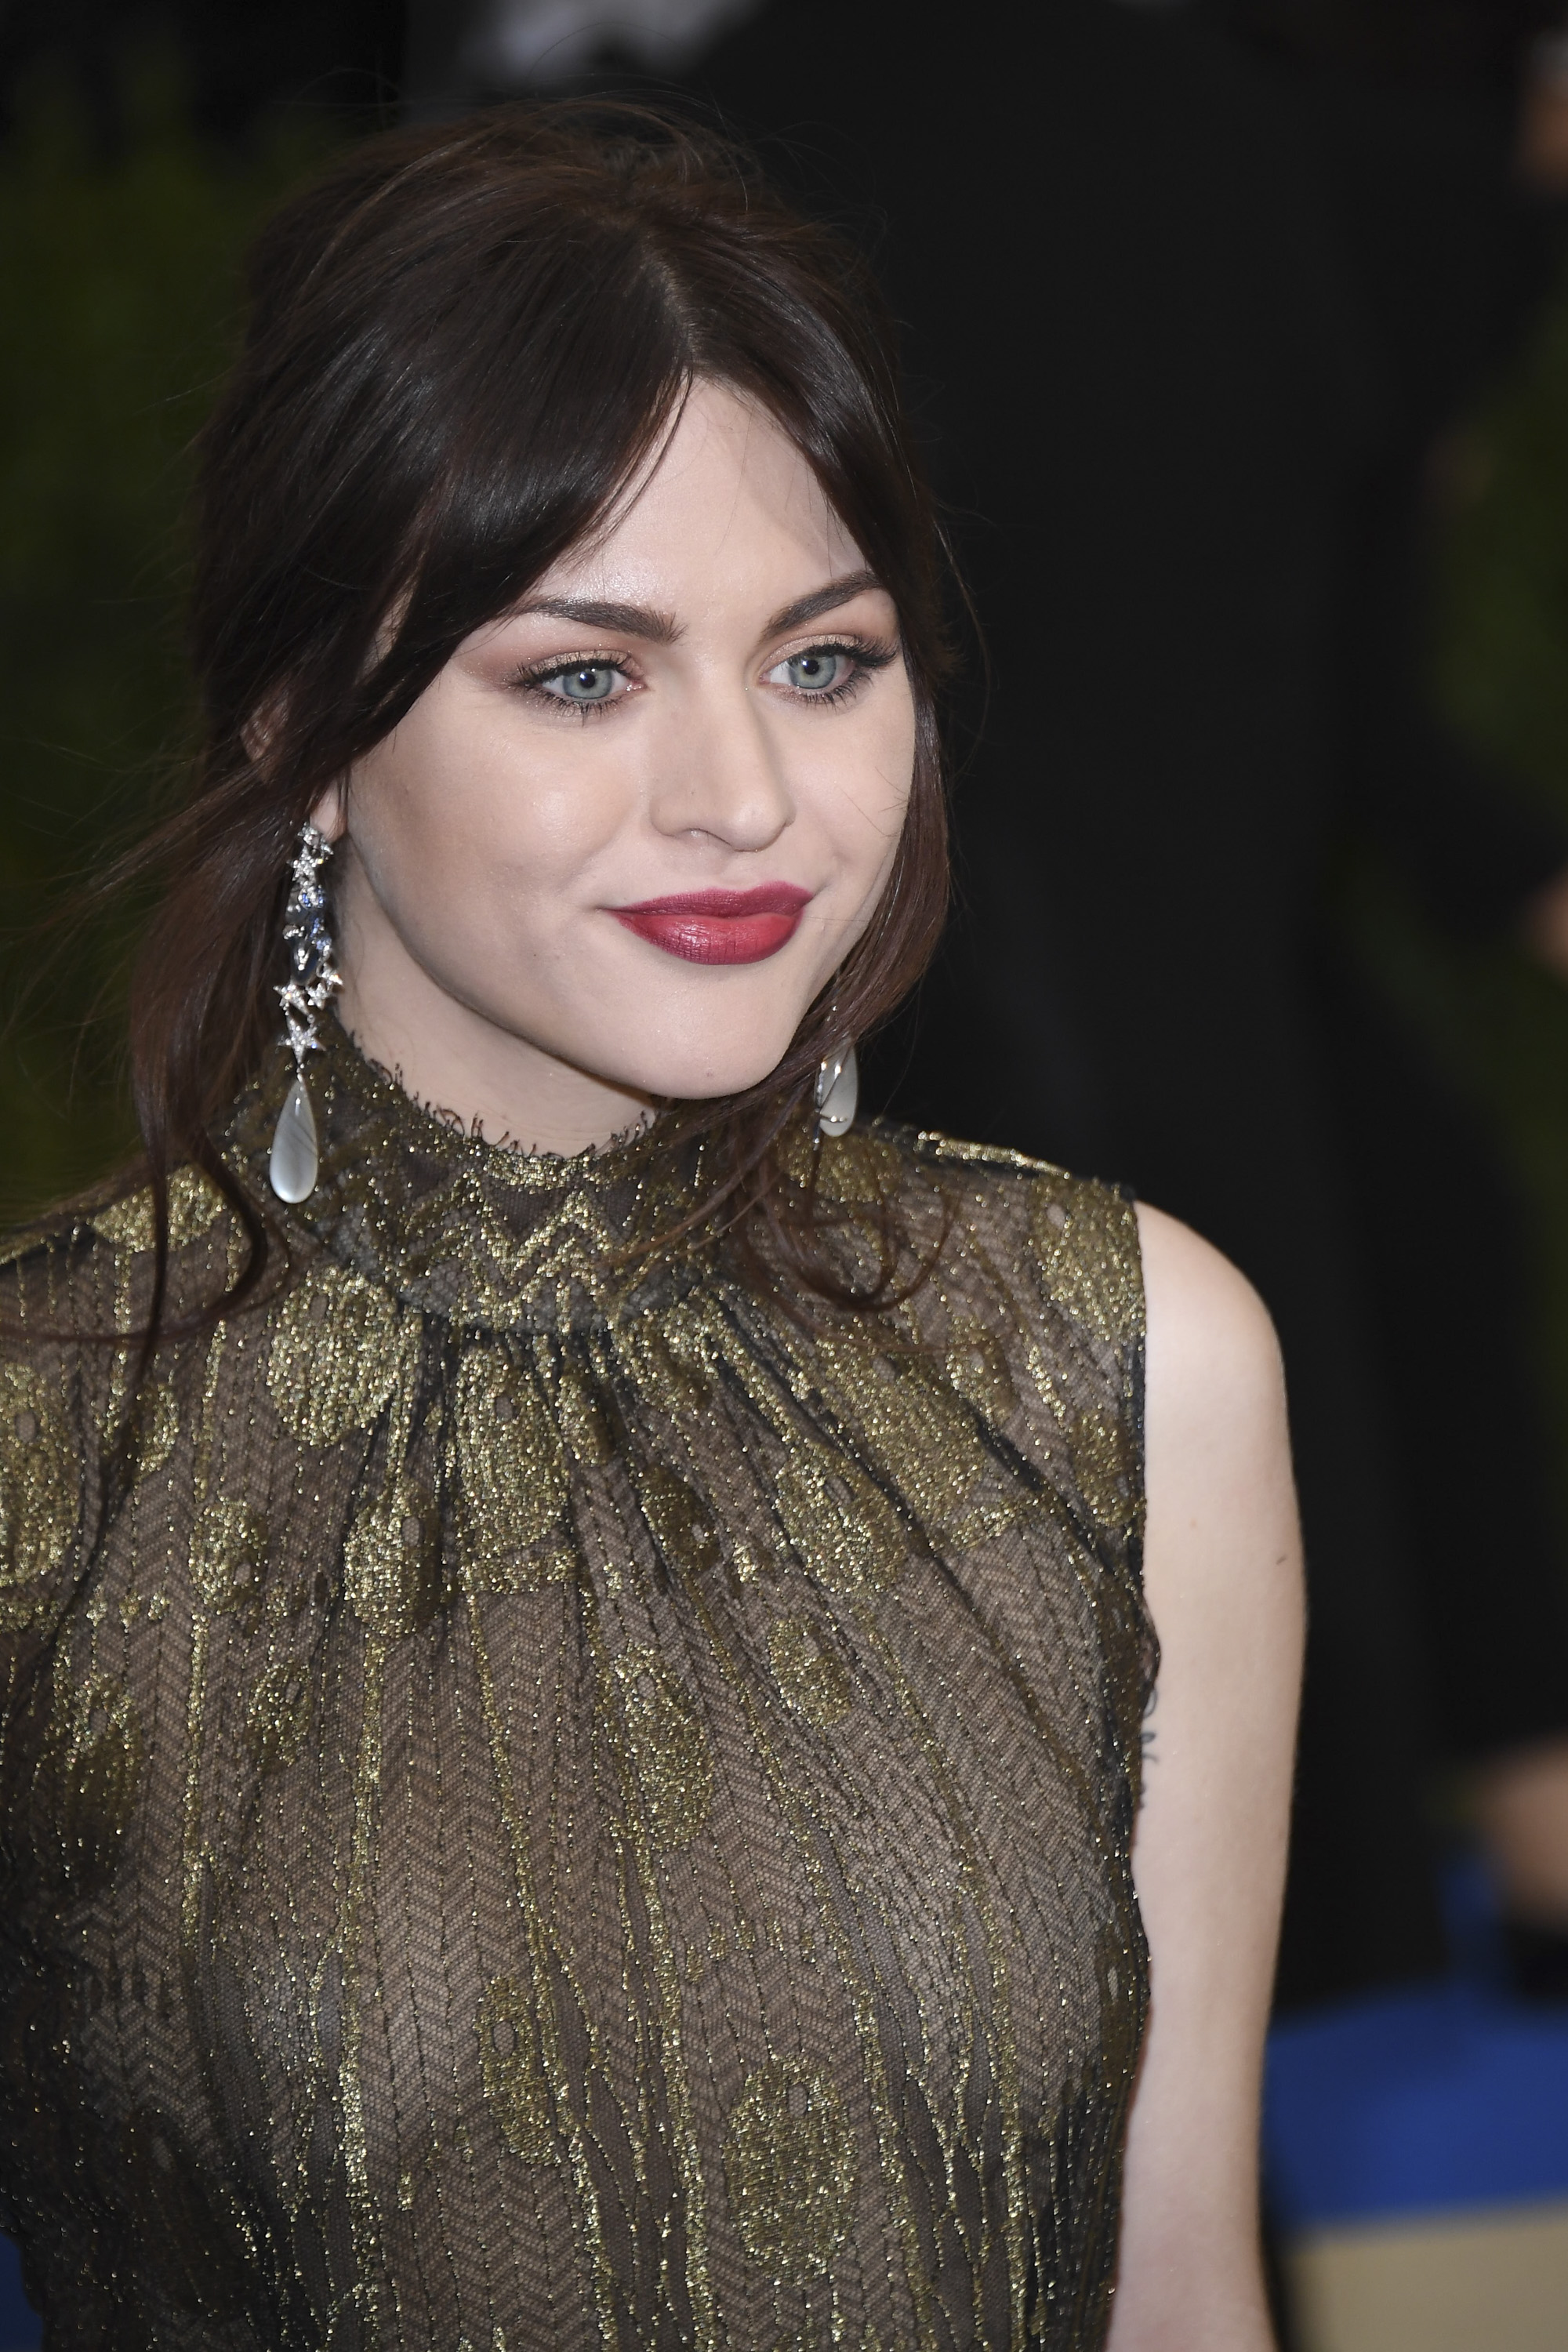 Frances Bean Cobain at the Met Gala in New York City on May 1, 2017 | Source: Getty Images